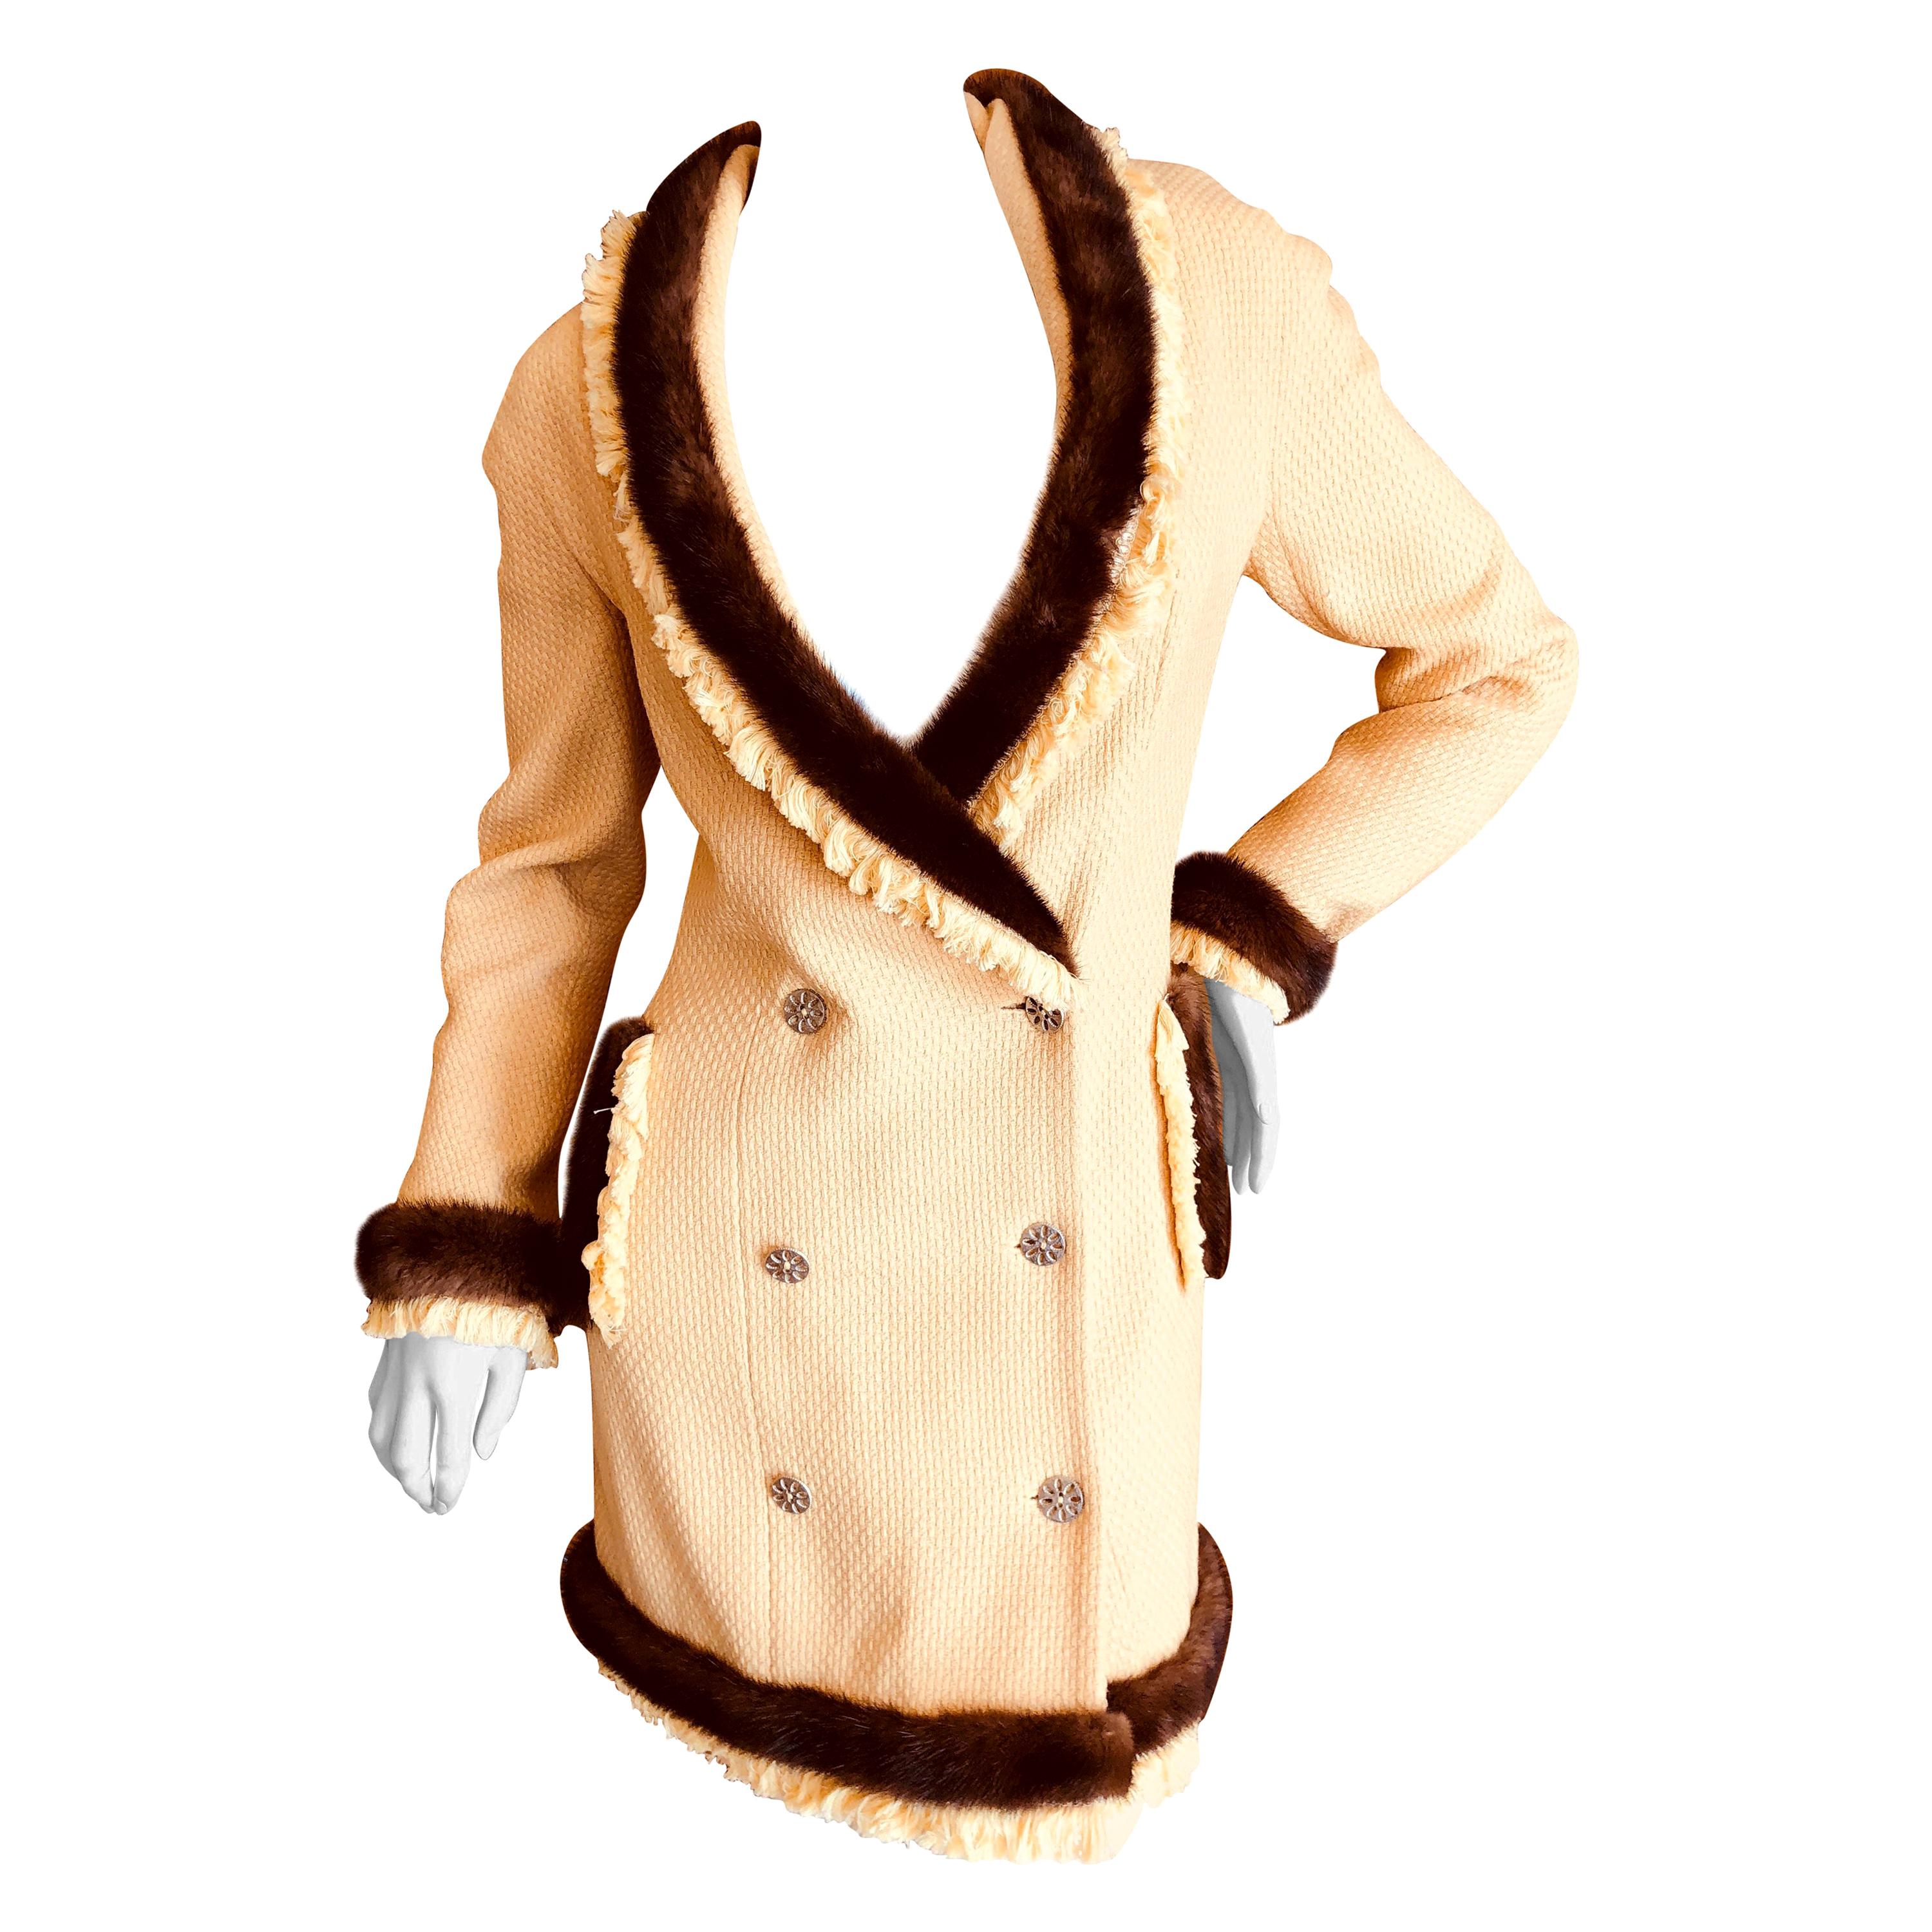 Christian Dior by John Galliano Autumn 1997 Mink Trim Yellow Boucle Coat Dress For Sale